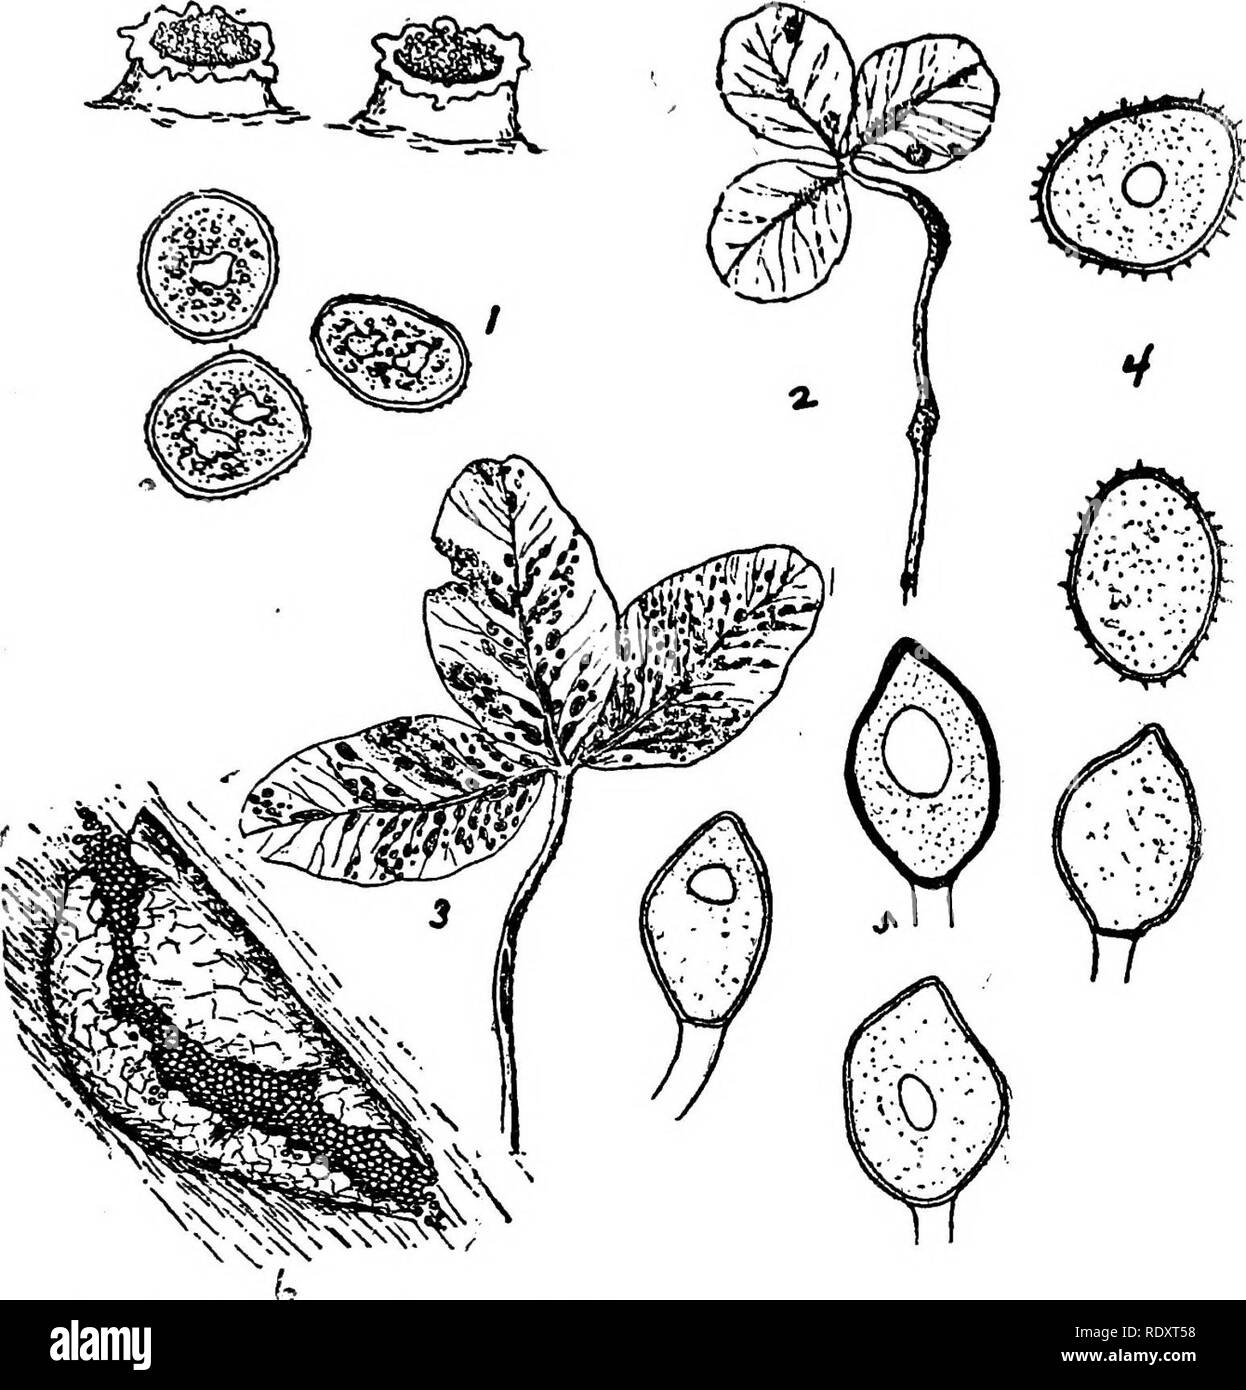 . A manual of poisonous plants, chiefly of eastern North America, with brief notes on economic and medicinal plants, and numerous illustrations. Poisonous plants. EUTHAI.LEPHYTA—EUMYCETES—RUSTS 231. Fig. 67. Qover Sust. Uromyces Trifolii. (Hedw.) I,ev. 1. Aecidium spores; above,, two cluster cups in which the aecidiospores are found. 2. White clover leaf showing the distortions produced by the aecidium stage. 3. Red clover leaf showing clusters of uredo spores. 4. Uredo spores. 5. Teleuto spores. 6. An uredo cluster more magnified than in 3. Figs. 1, 2, and 3 after Miss Howell. Remainder by Mi Stock Photo